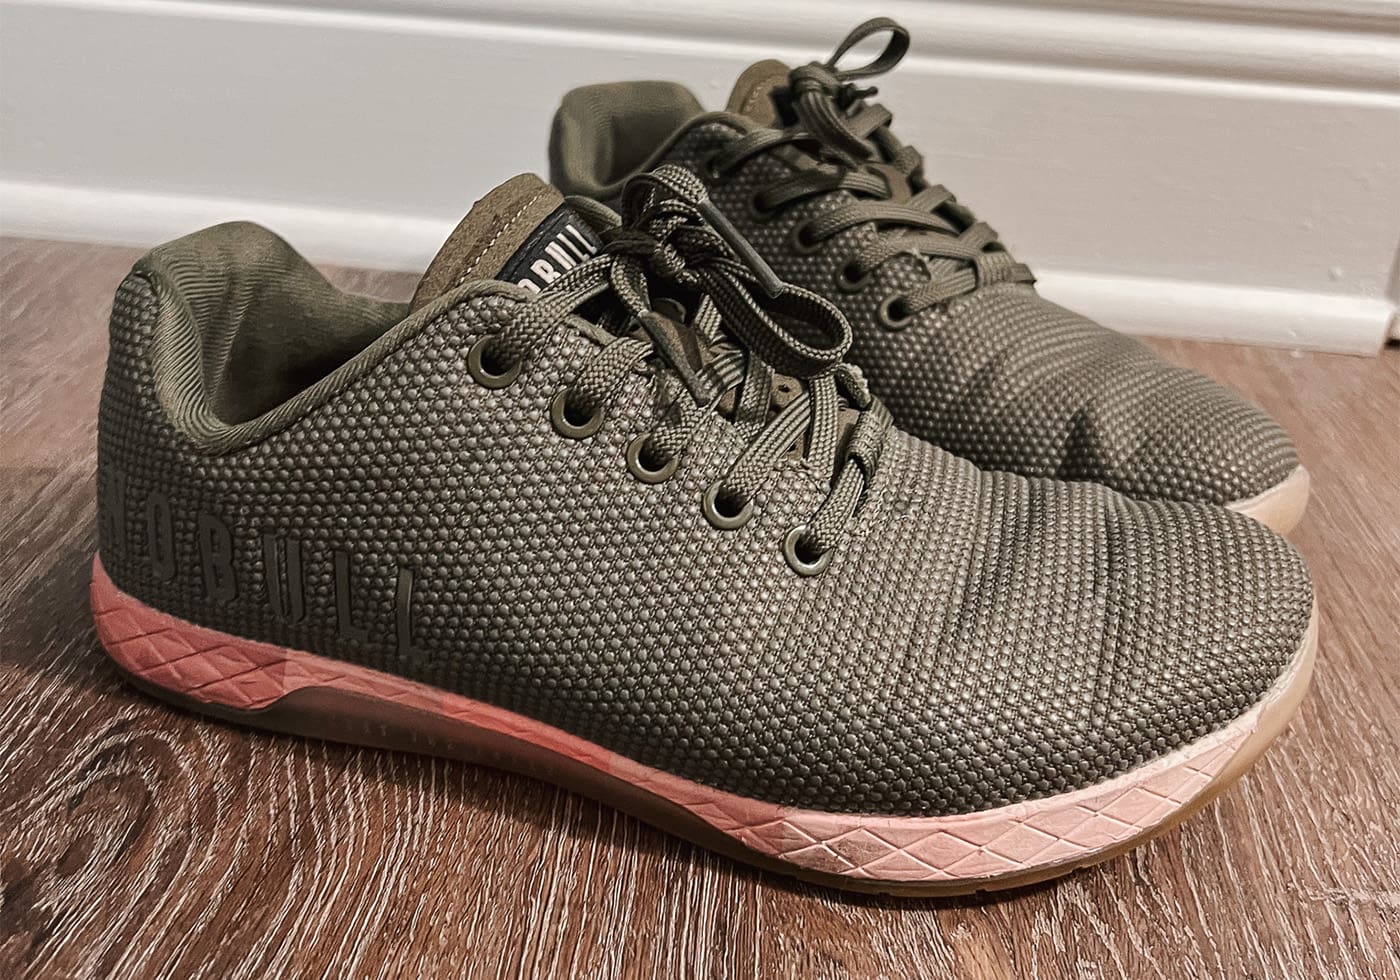 Are NoBull Shoes Good for Home Treadmill Use?